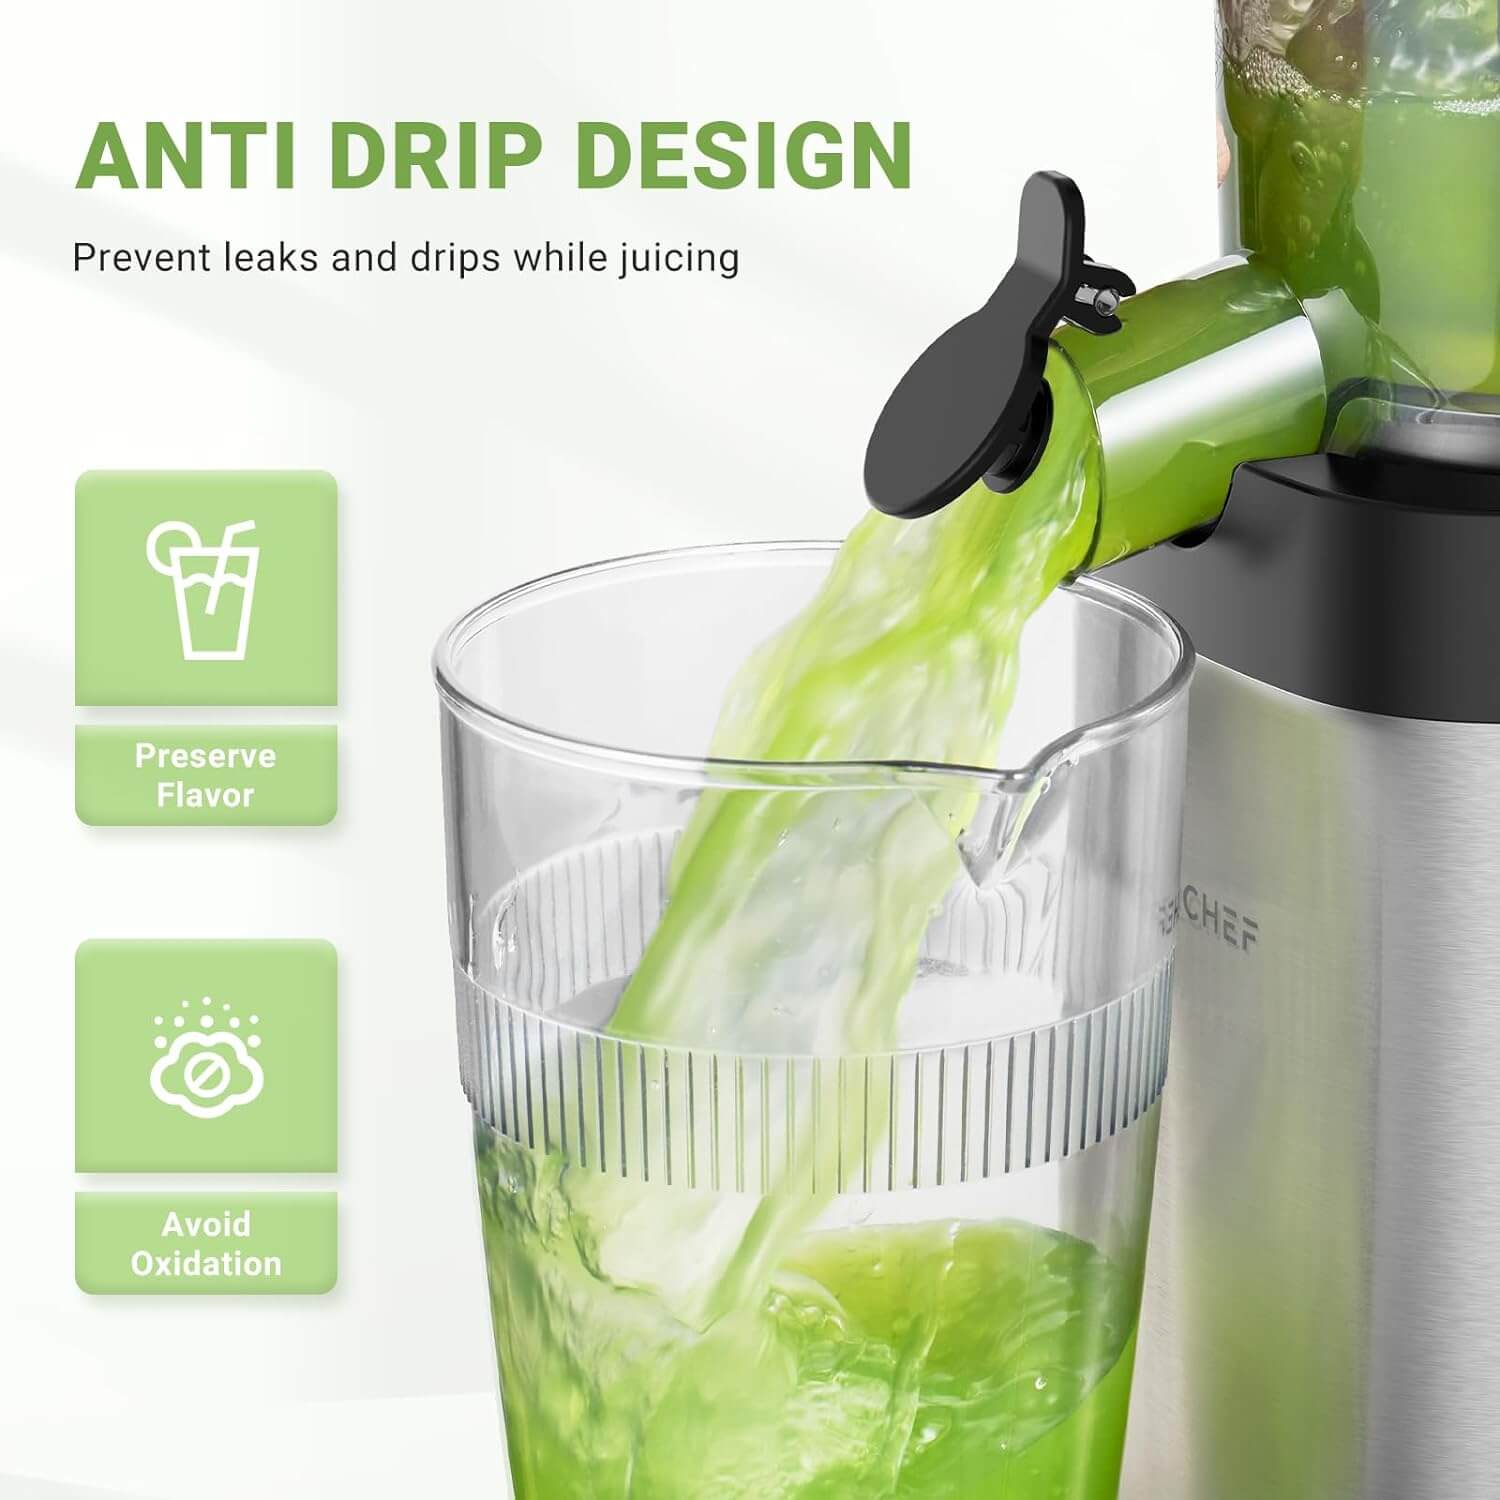 Amzchf Juicer Machine with Large Feed Chute for Whole Fruits